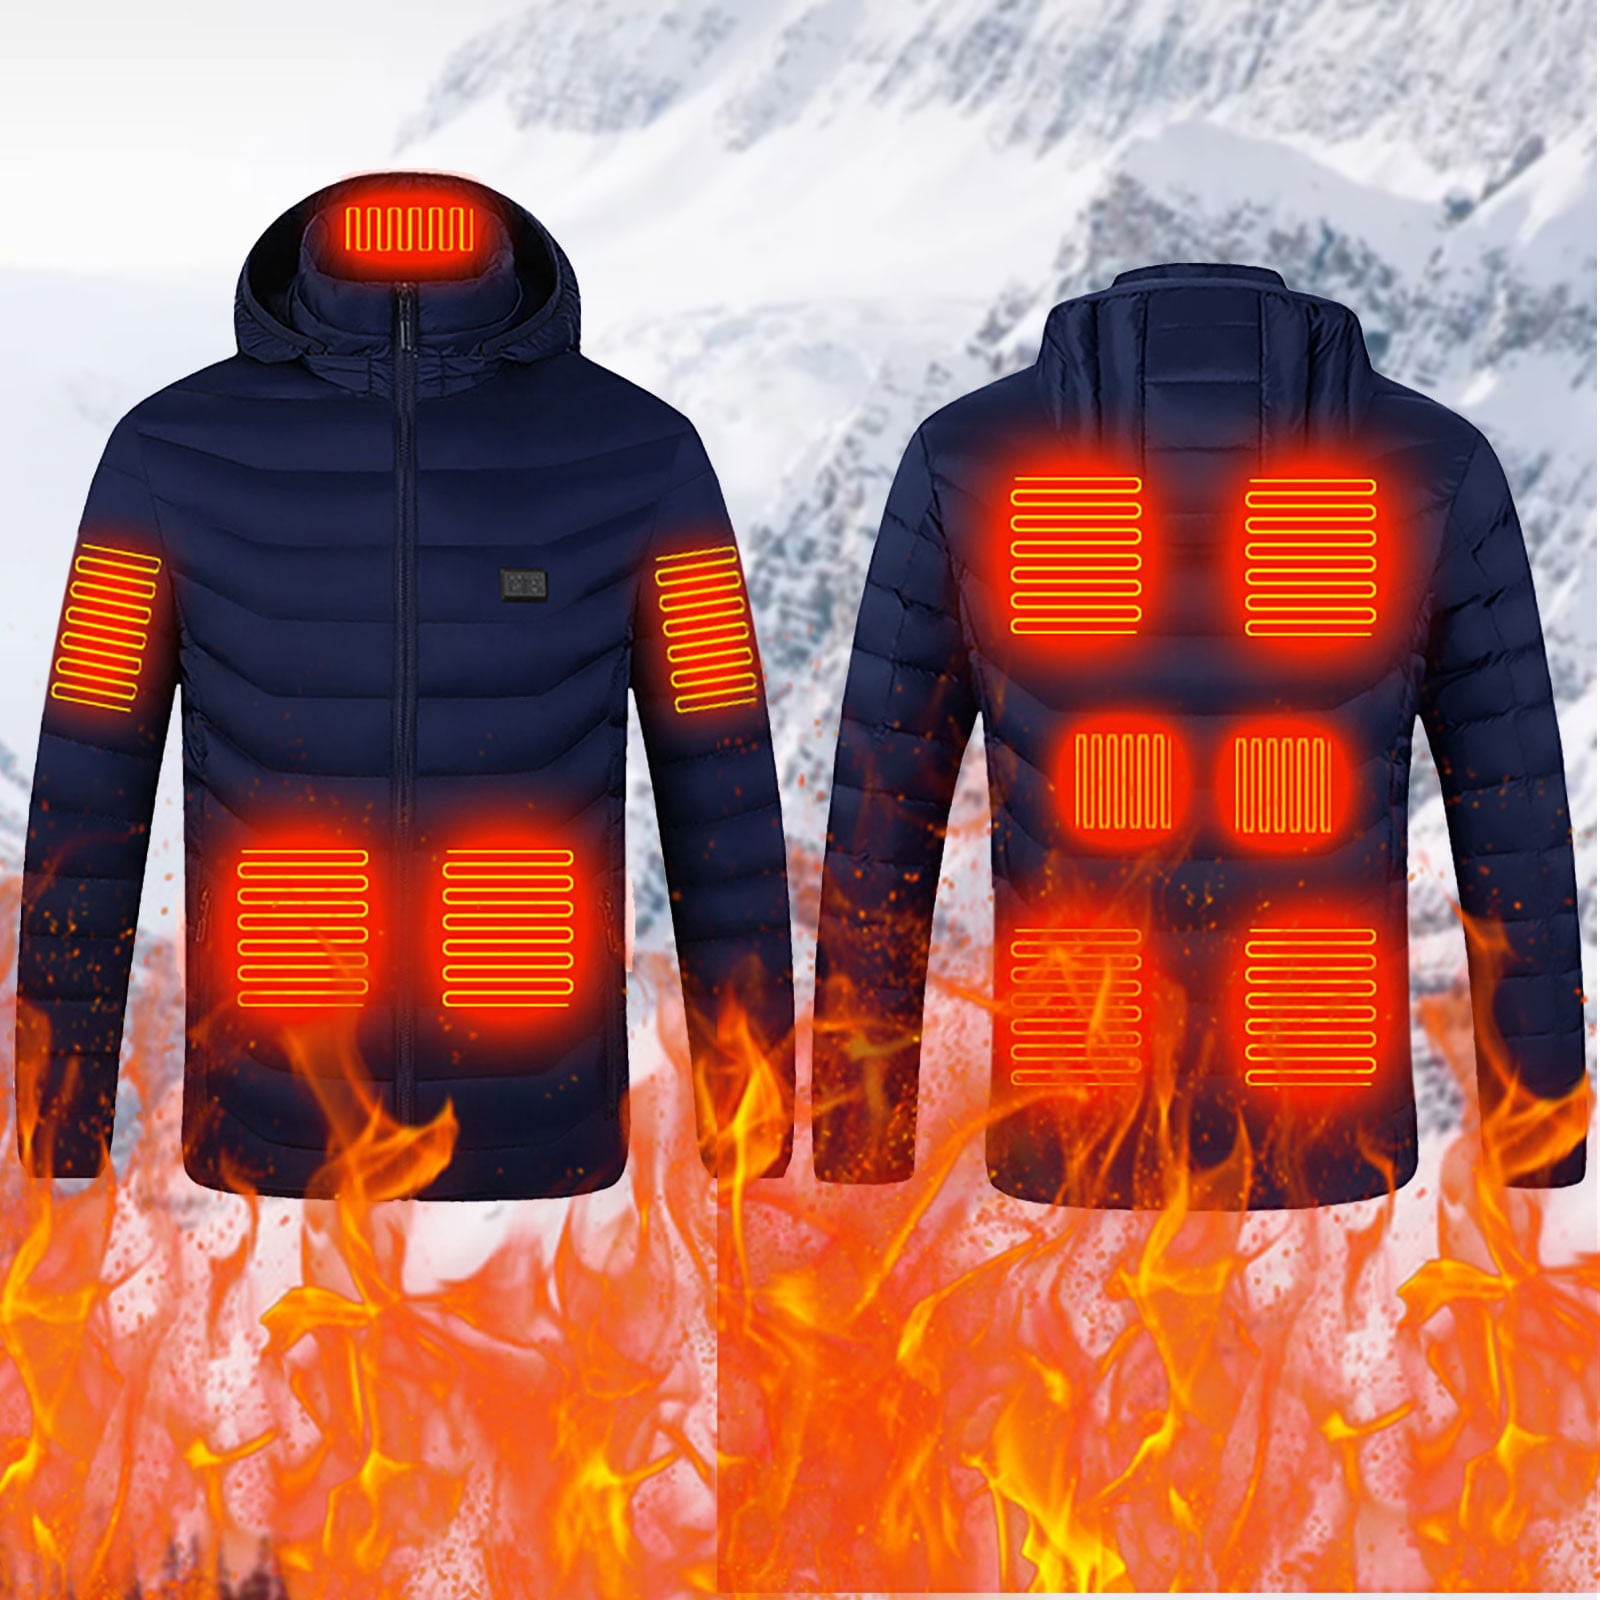 Abcnature Men's Active & Performance Shell Jackets Heated Jacket with Battery Pack Winter Outdoor Soft Shell Smart Electric Heating USB Coat Windproof